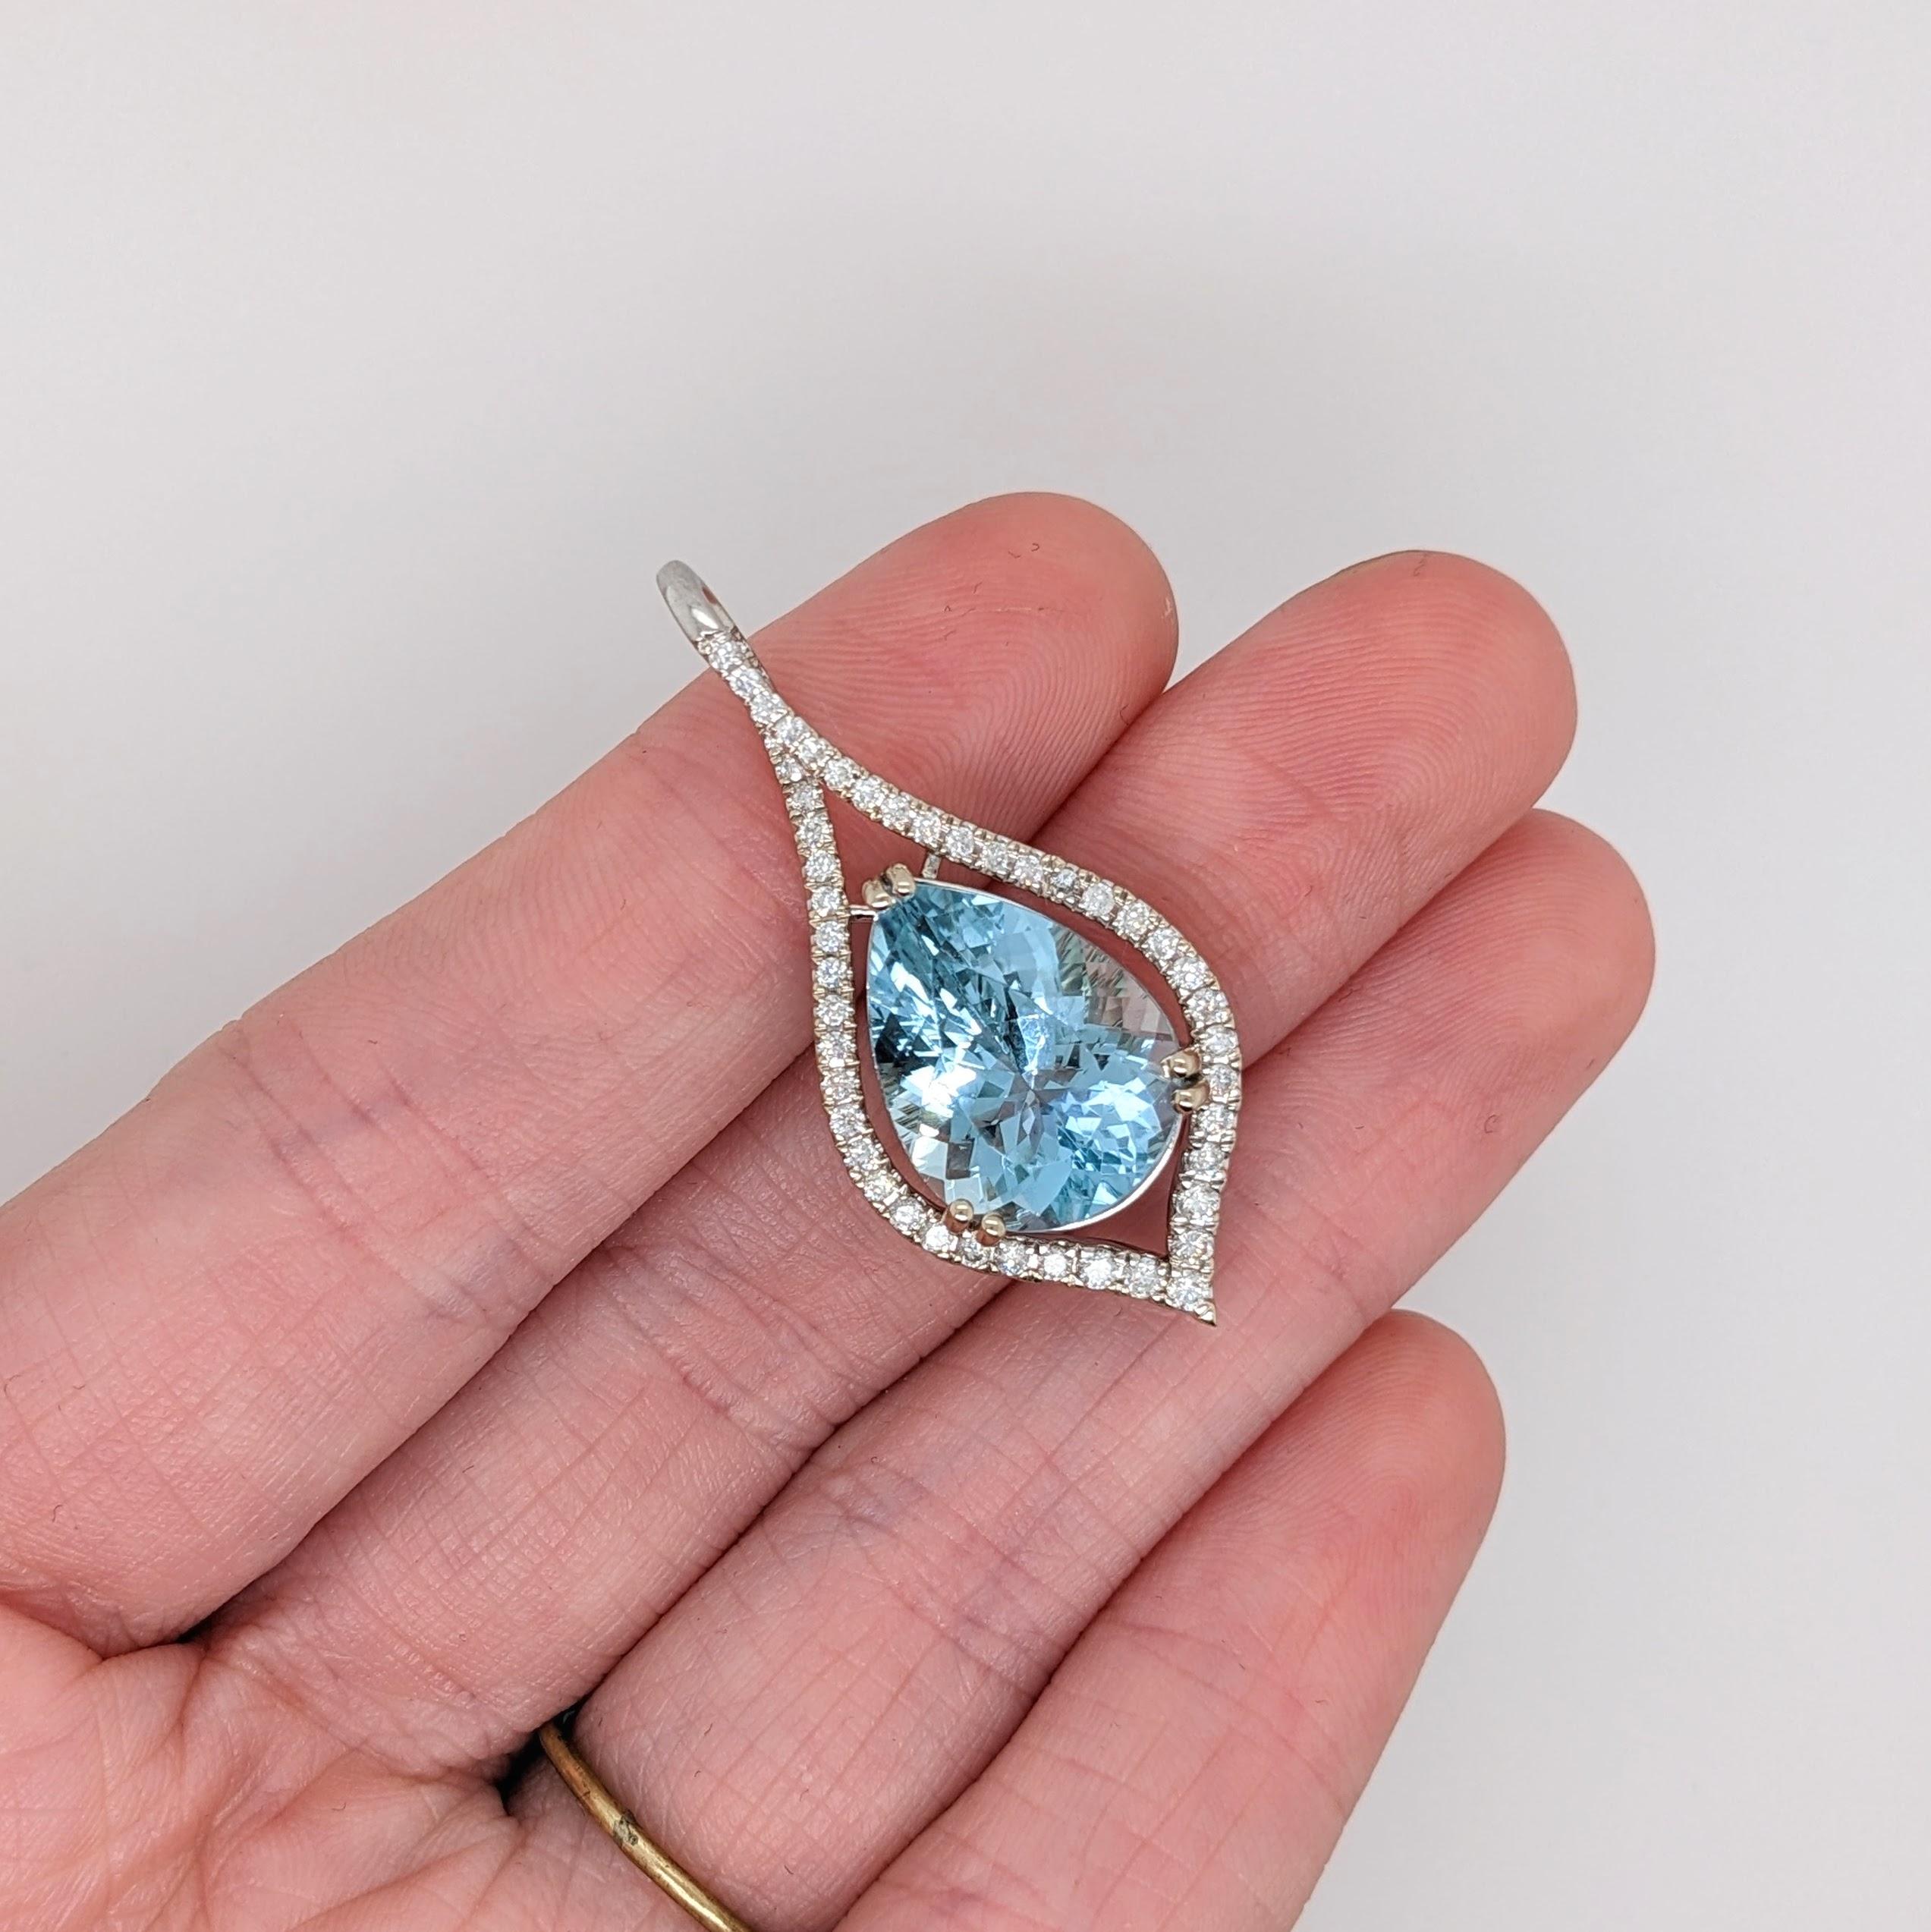 Pear Cut 8.11ct Aquamarine Pendant w Natural Diamond Accents Solid 14K Gold Pear 18x12mm For Sale